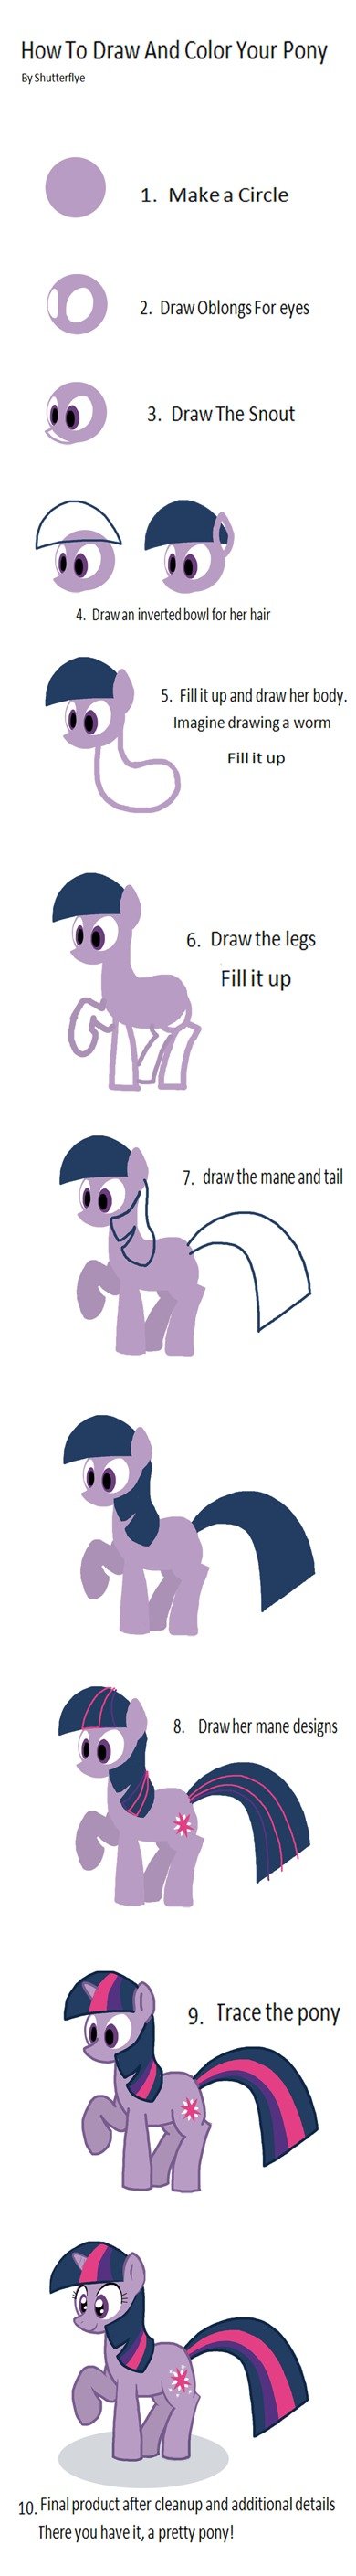 How To Draw A Pony. I found this kinds helpful, so I figured I'd just share it here. Deviantart I got this from: . Howto Draw And Color Your Pony ll) 1. Mama Ci